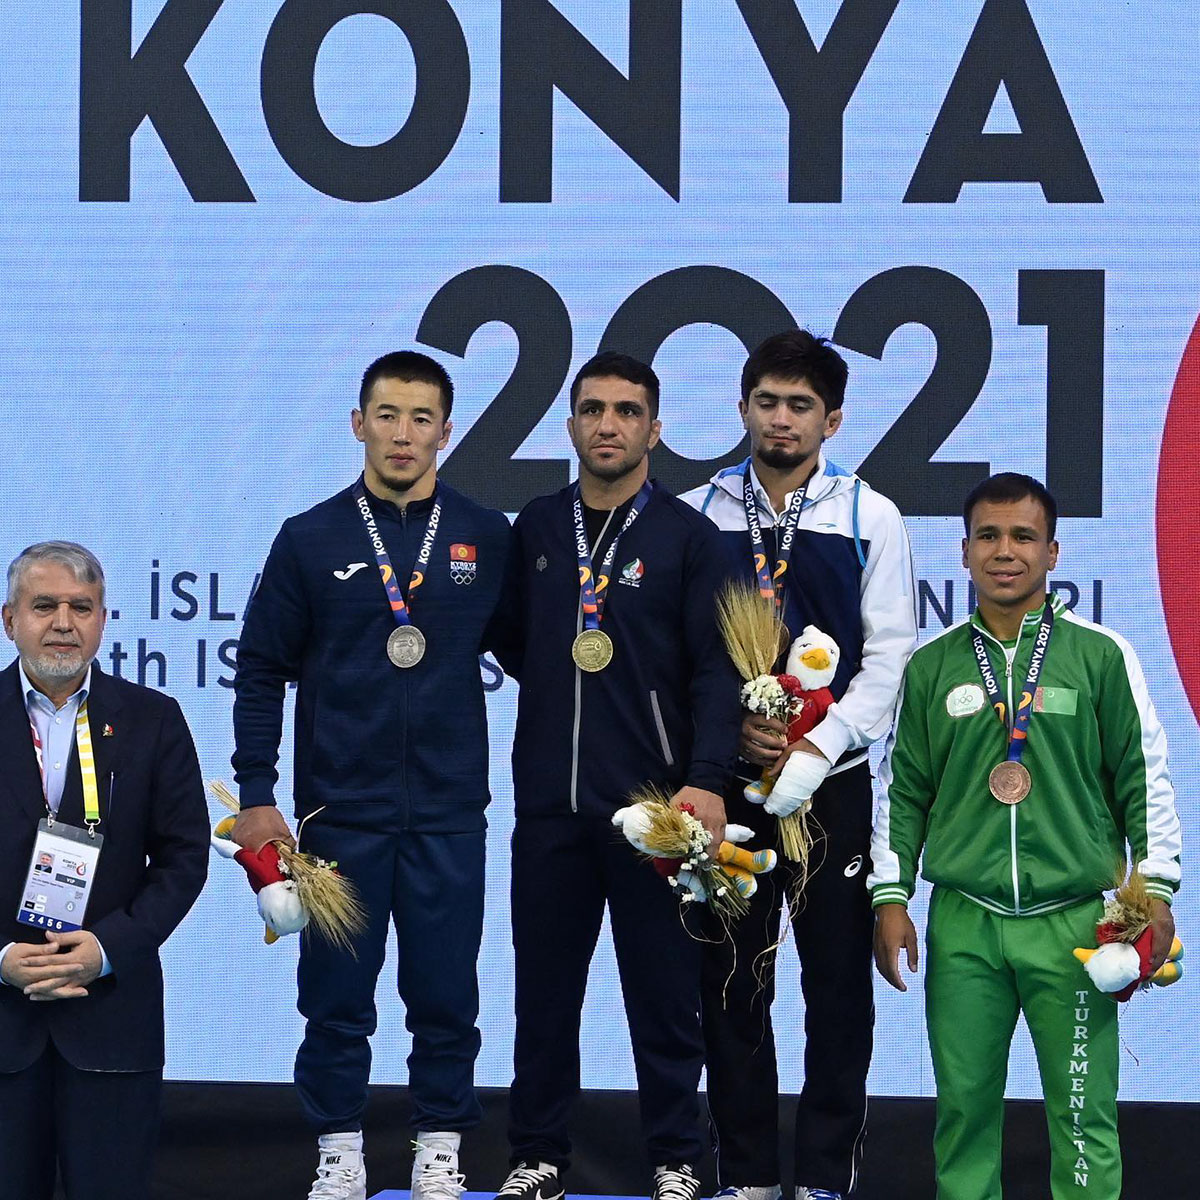 Turkmen athletes win seven medals at the 5th Islamic Solidarity Games